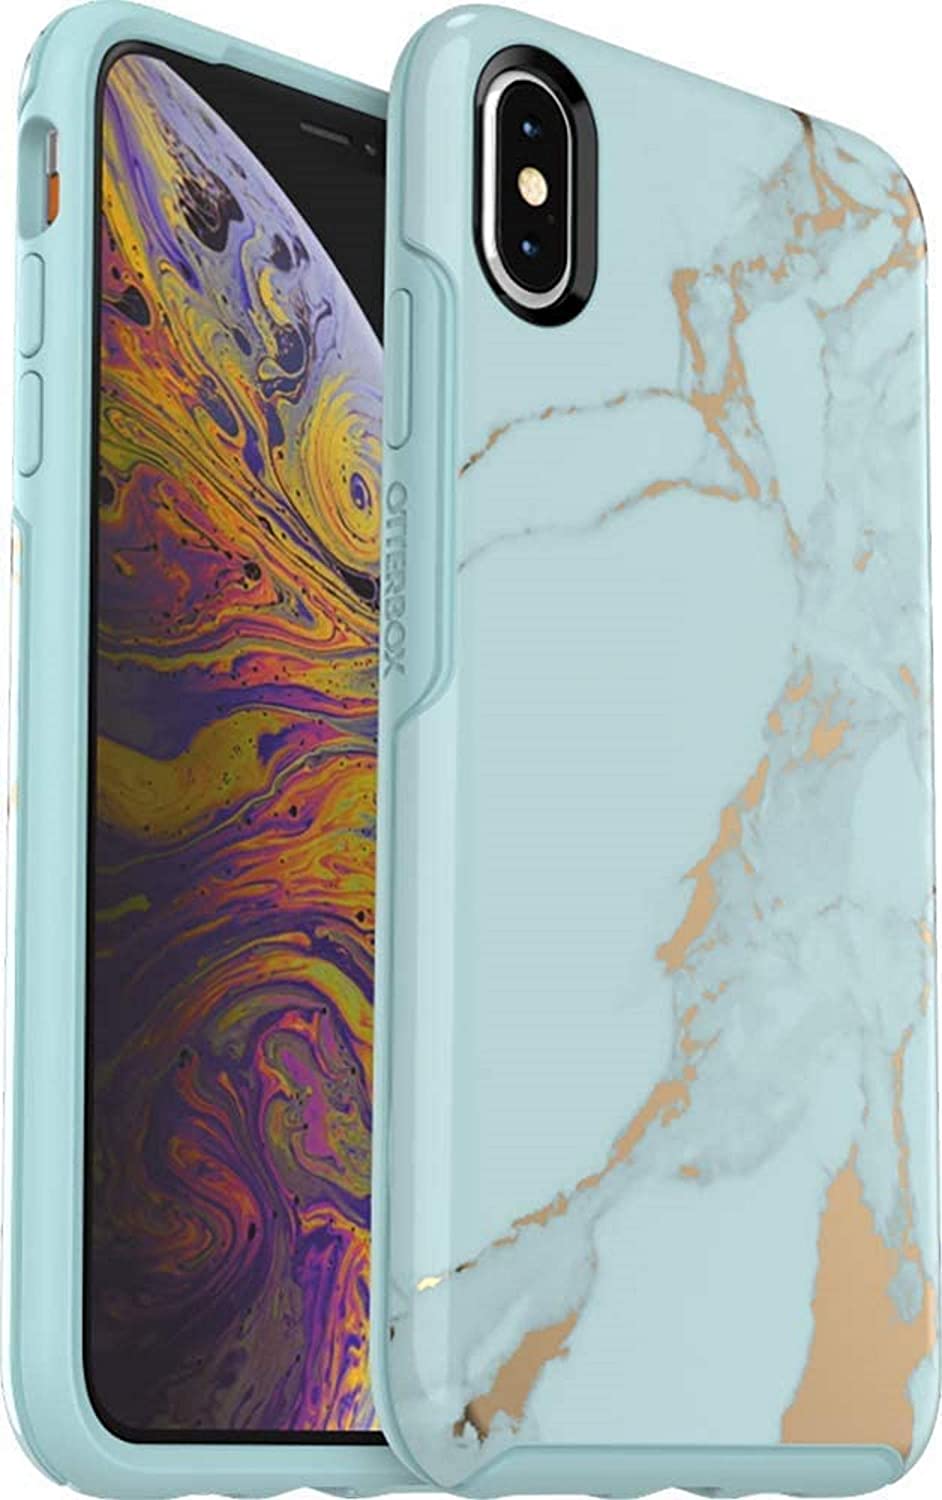 OtterBox SYMMETRY SERIES Case for Apple iPhone XS Max - Teal Marble (Certified Refurbished)